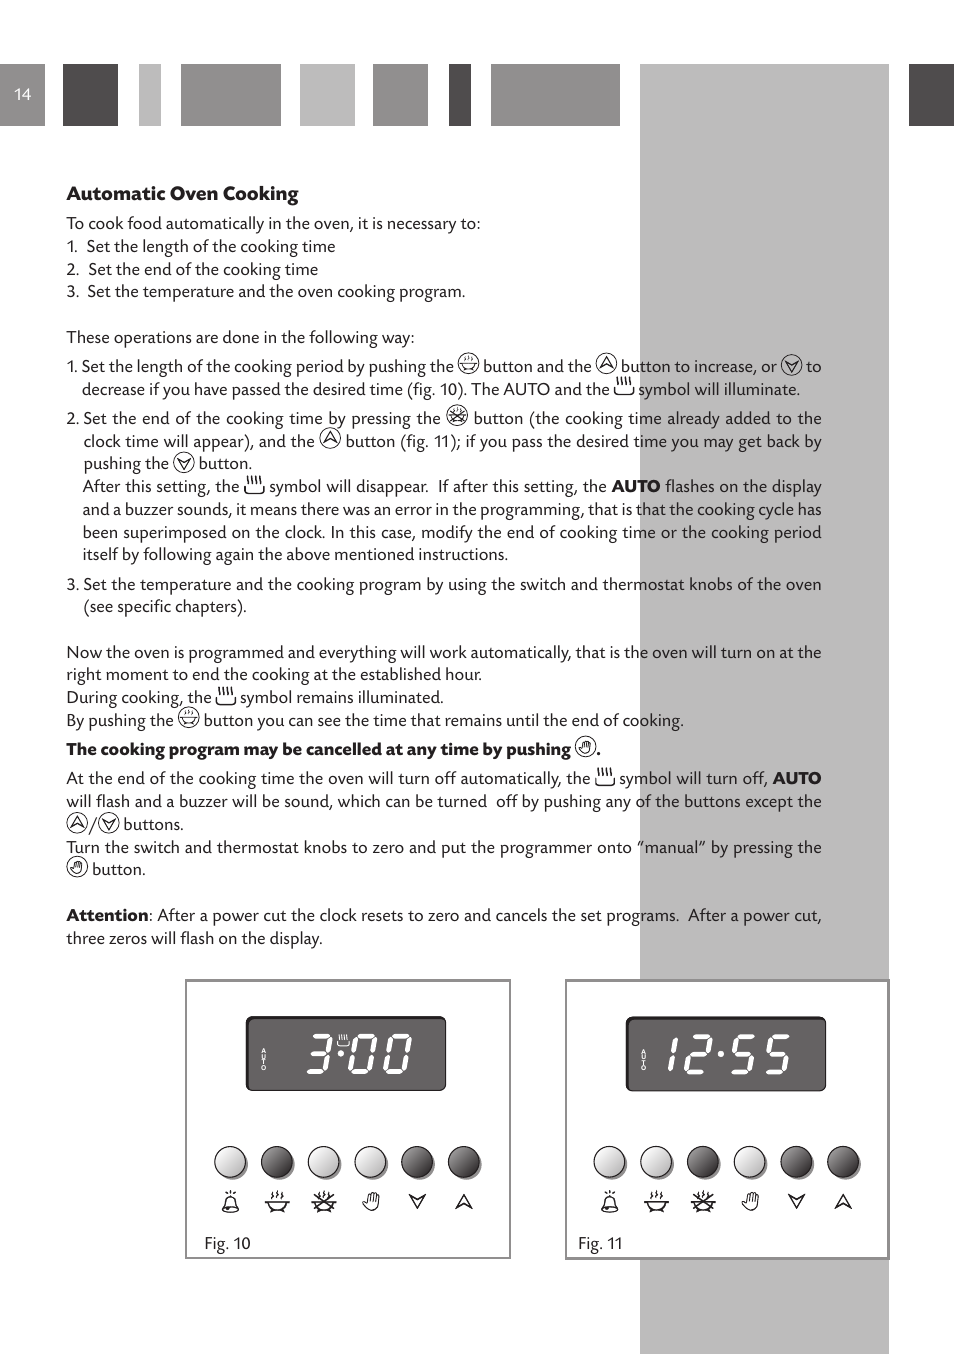 Automatic oven cooking | CDA DC930 User Manual | Page 14 / 32